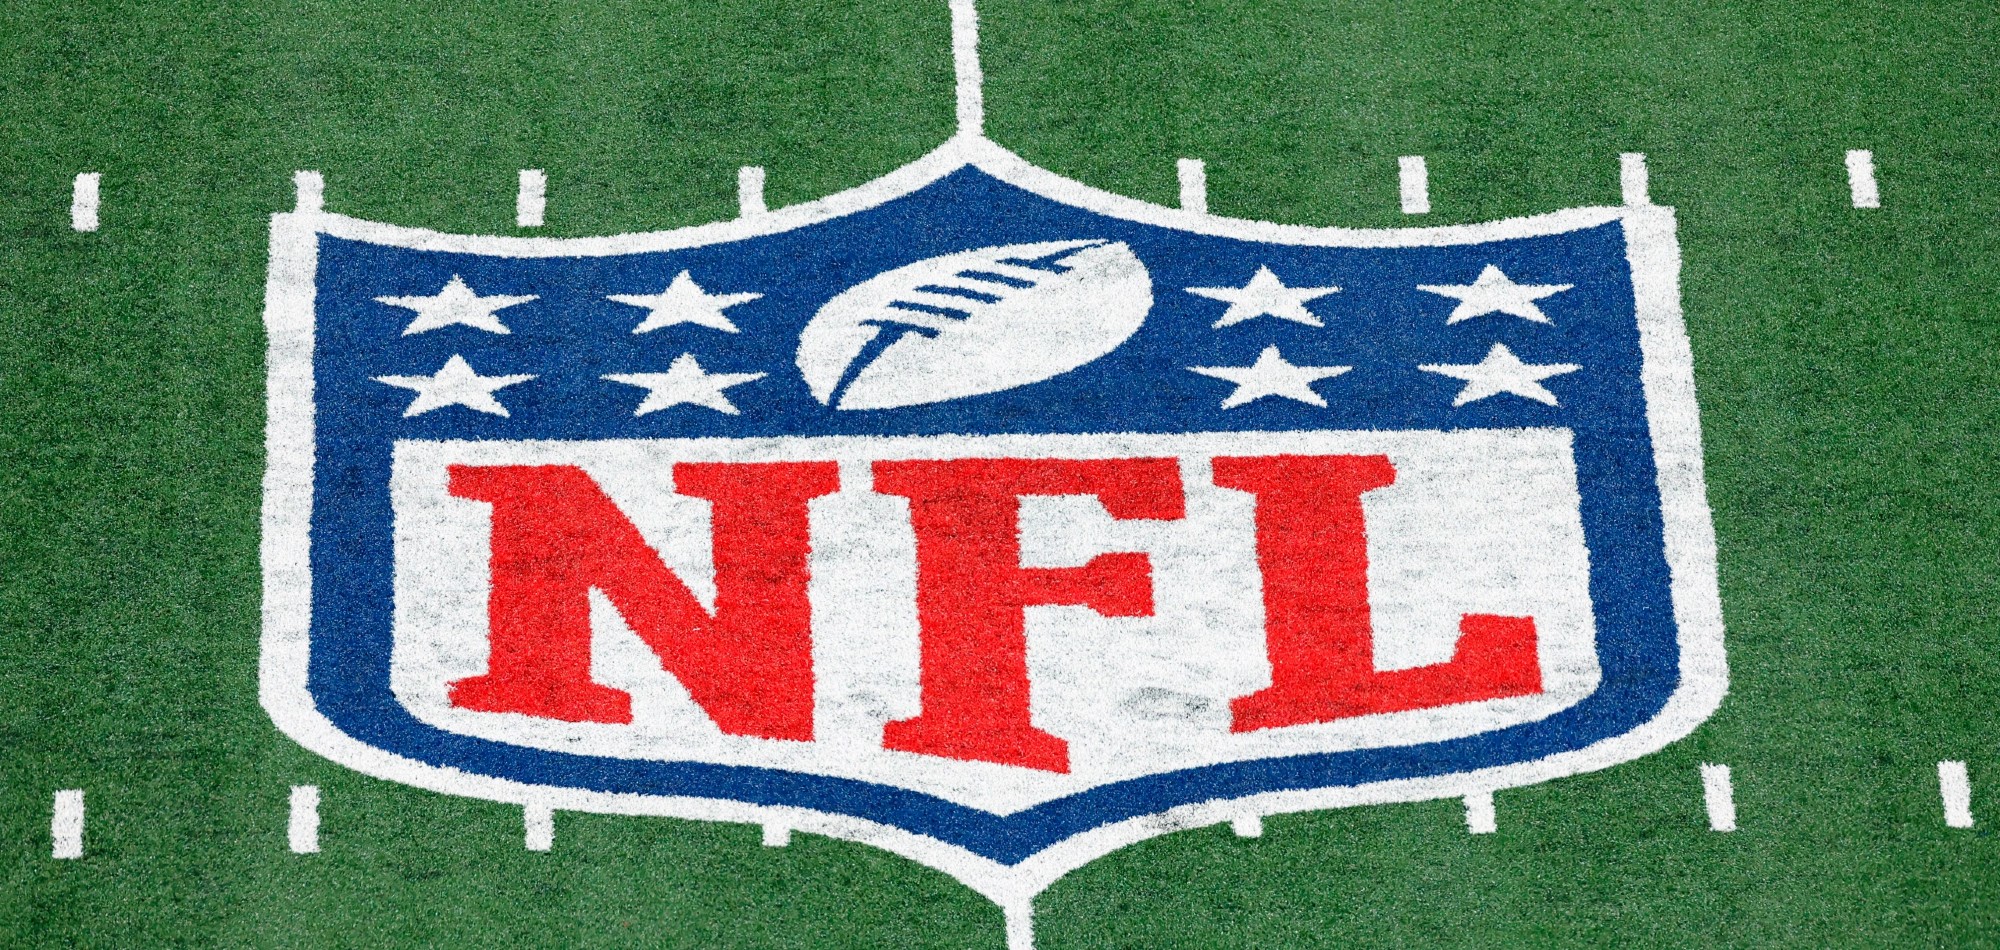 New season of the NFL kicks off amid rift over COVID-19 vaccines and testing